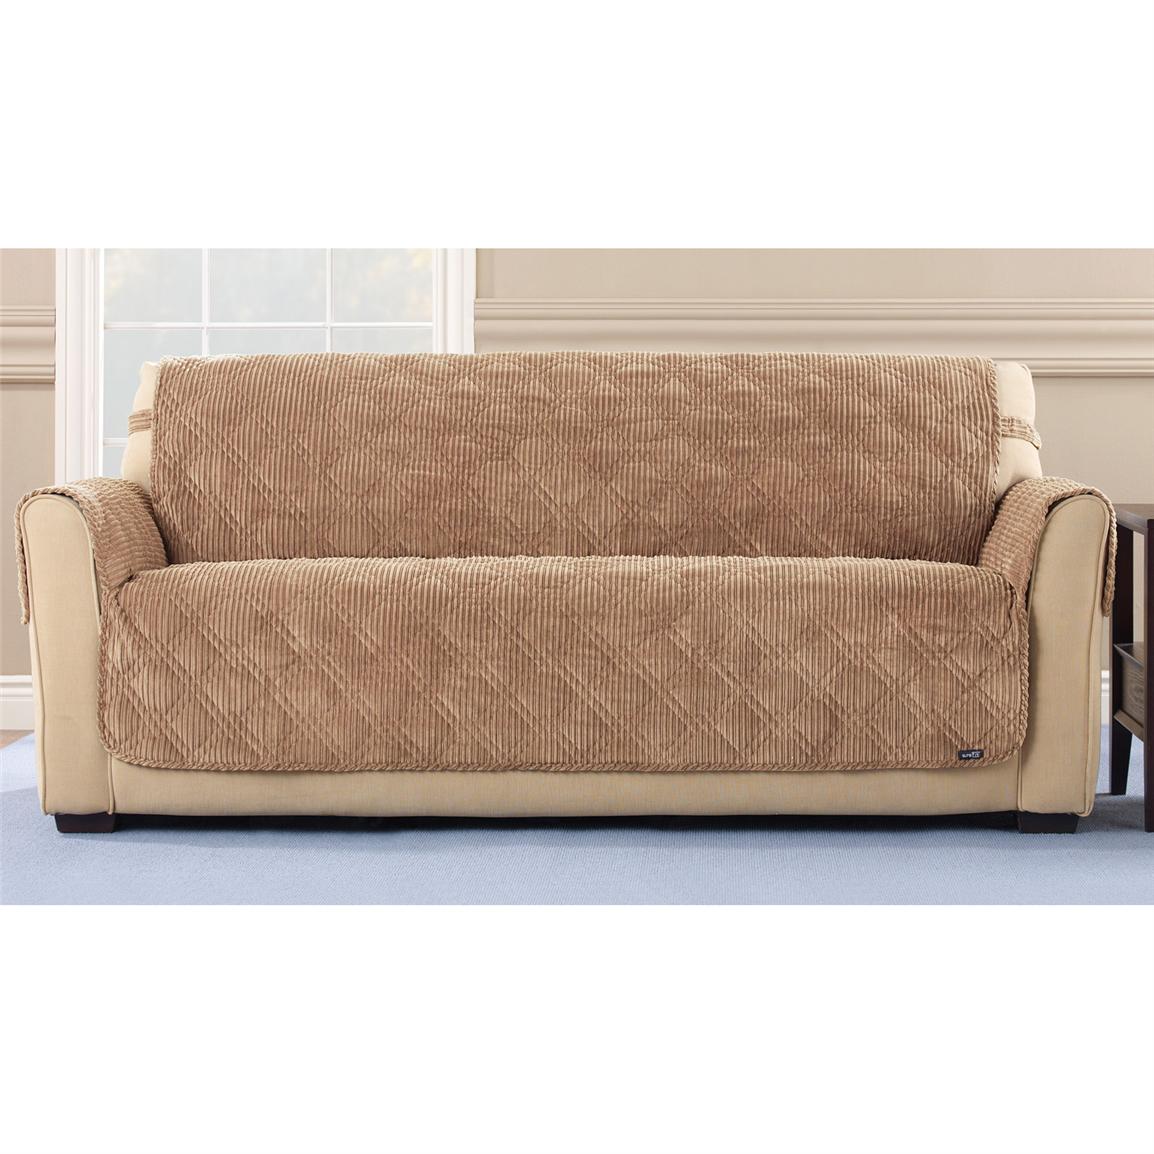 Sure Fit Quilted Corduroy Sofa Pet Cover 292846 Furniture